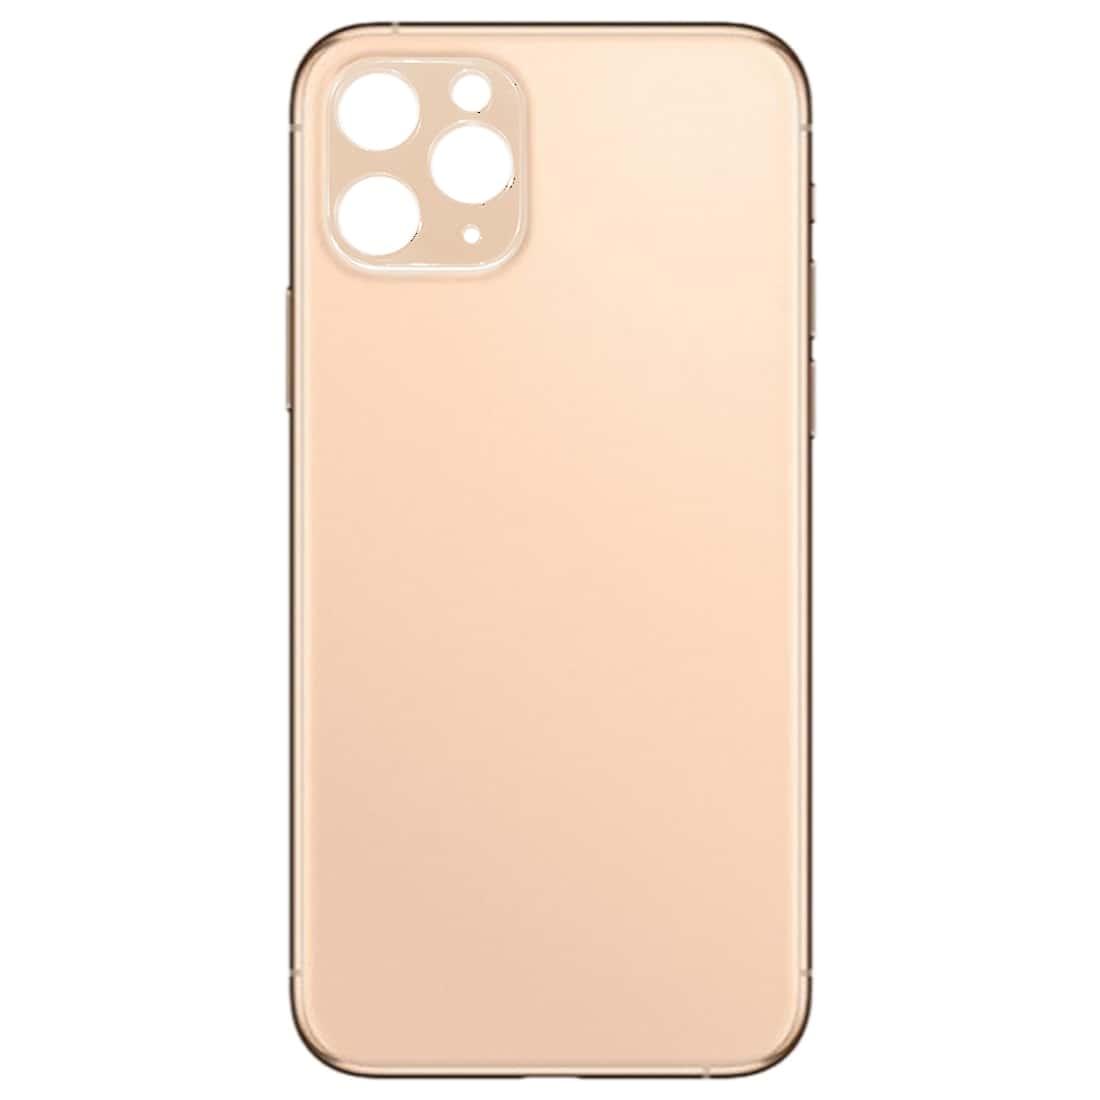 Back Glass Panel for  iPhone 11 Pro Max Gold